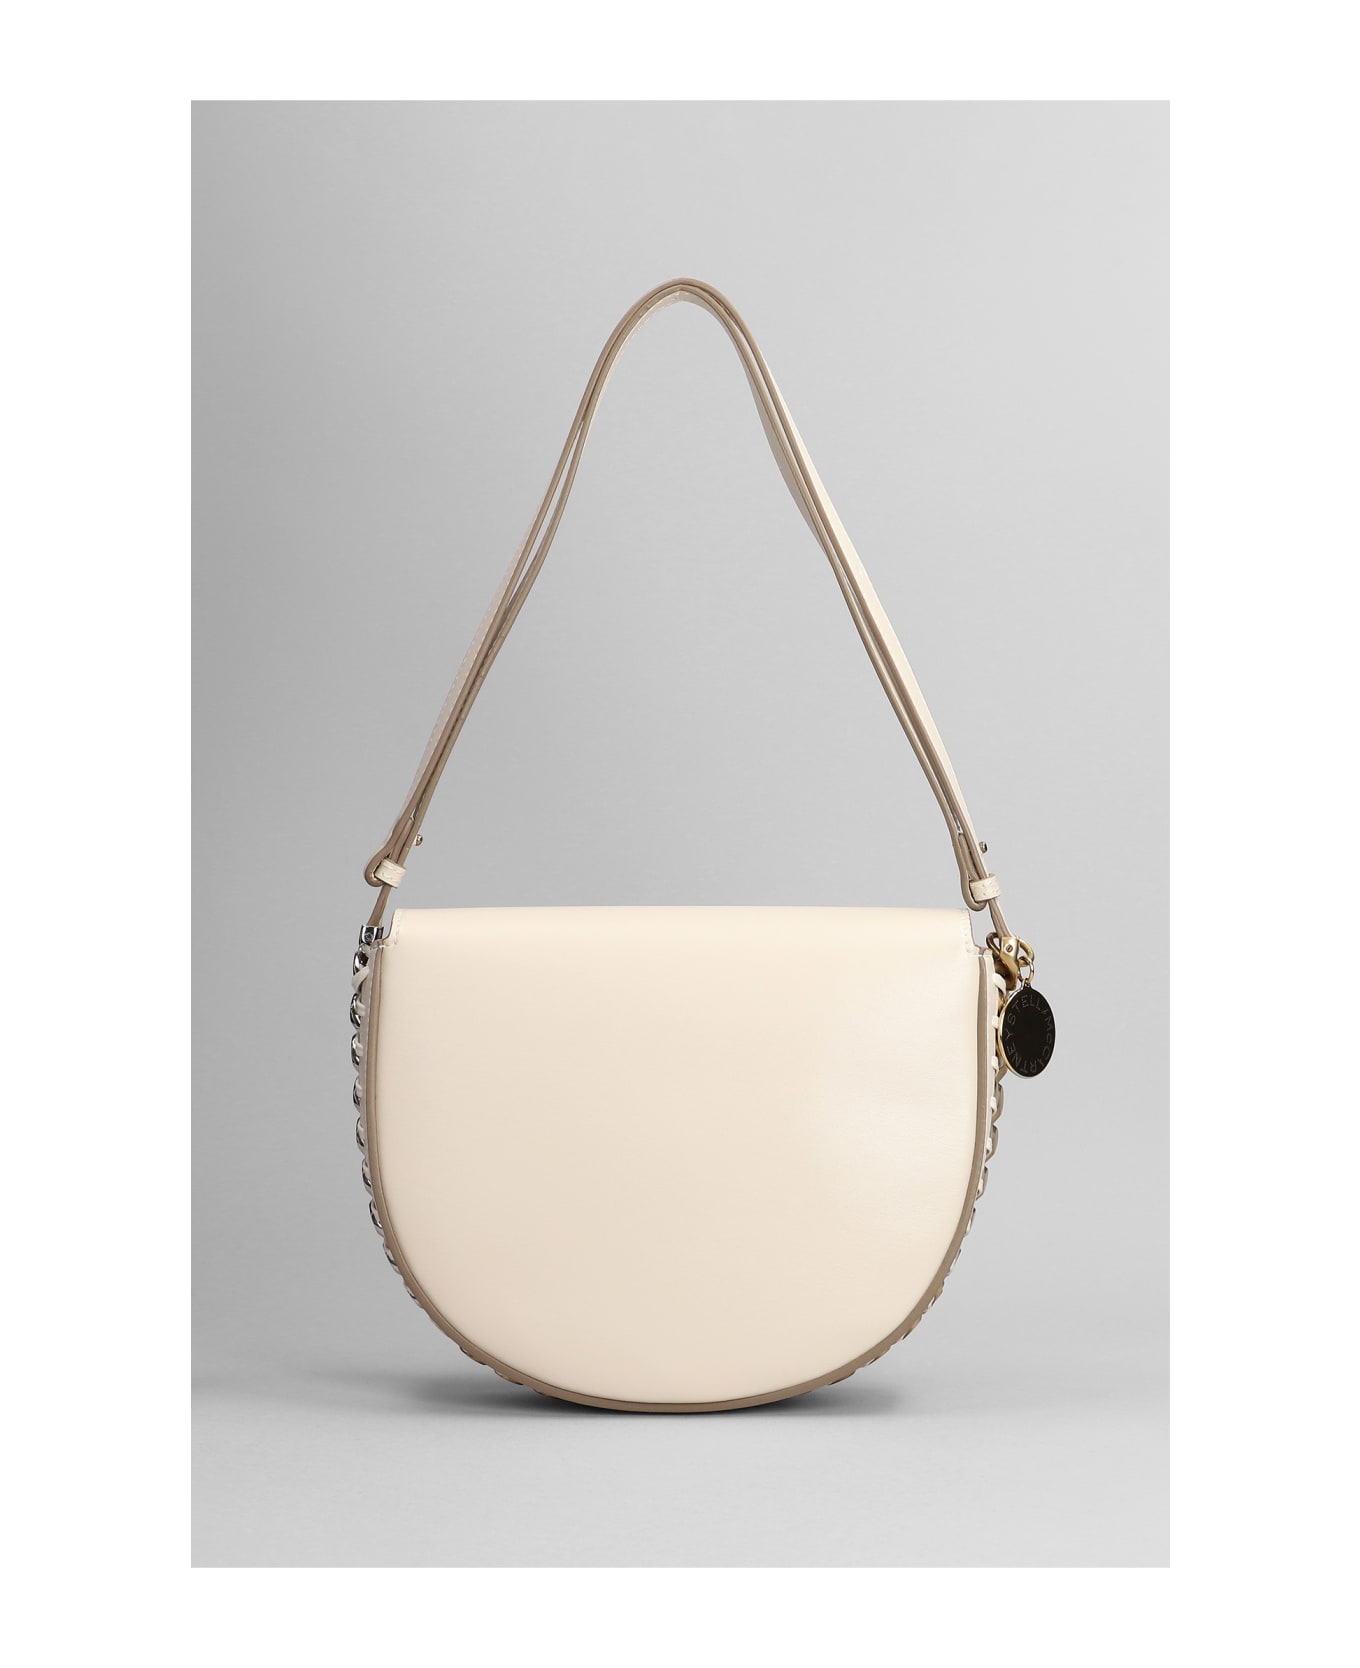 Stella McCartney Shoulder Bag In White Faux Leather - white トートバッグ